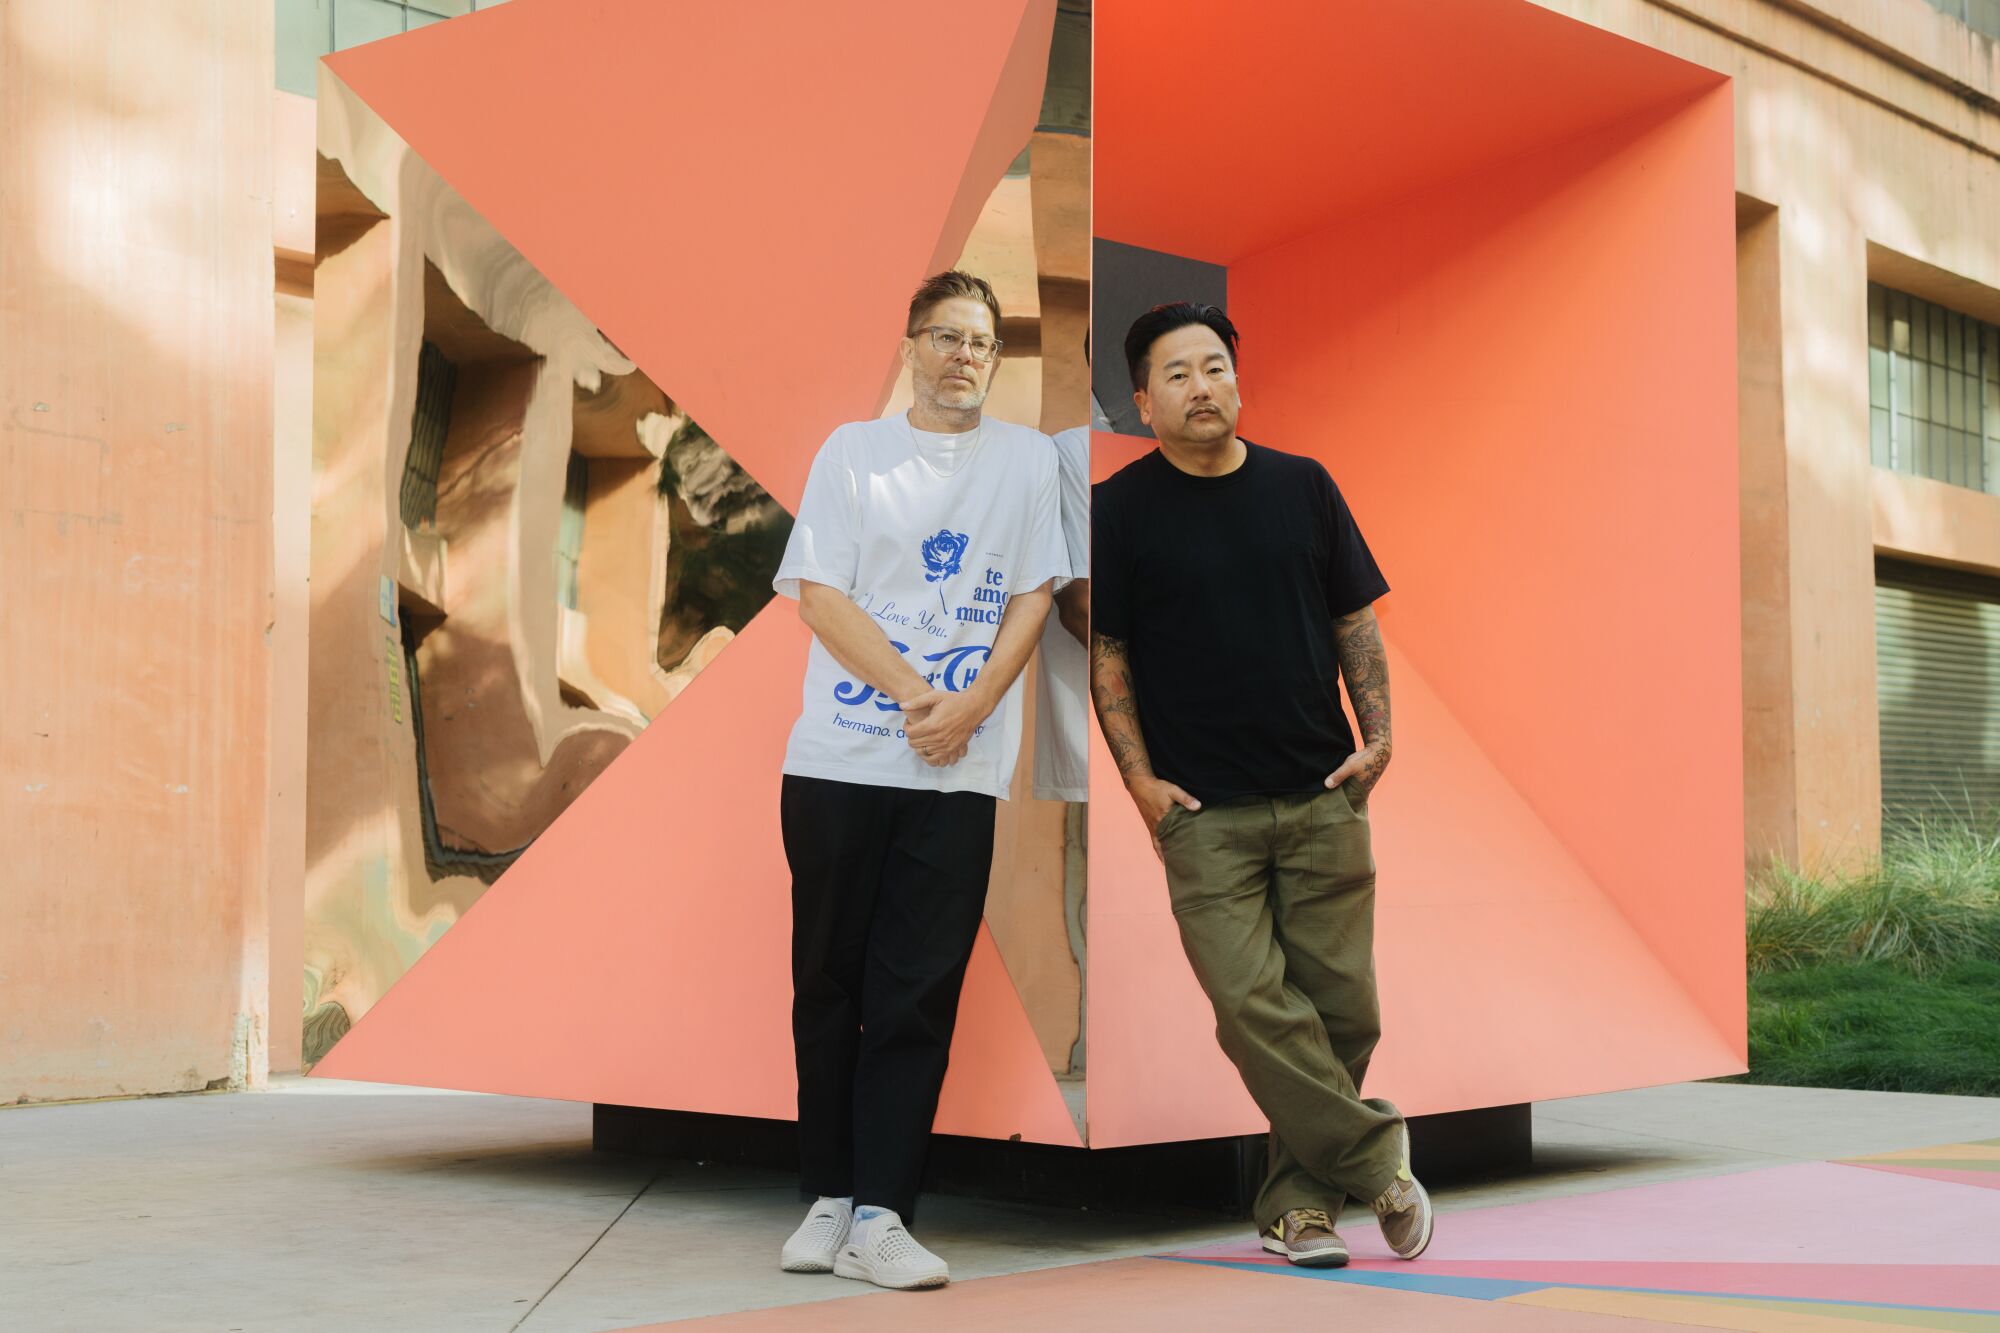 Josh Kun, left, and Roy Choi in front of an orange, square sculpture